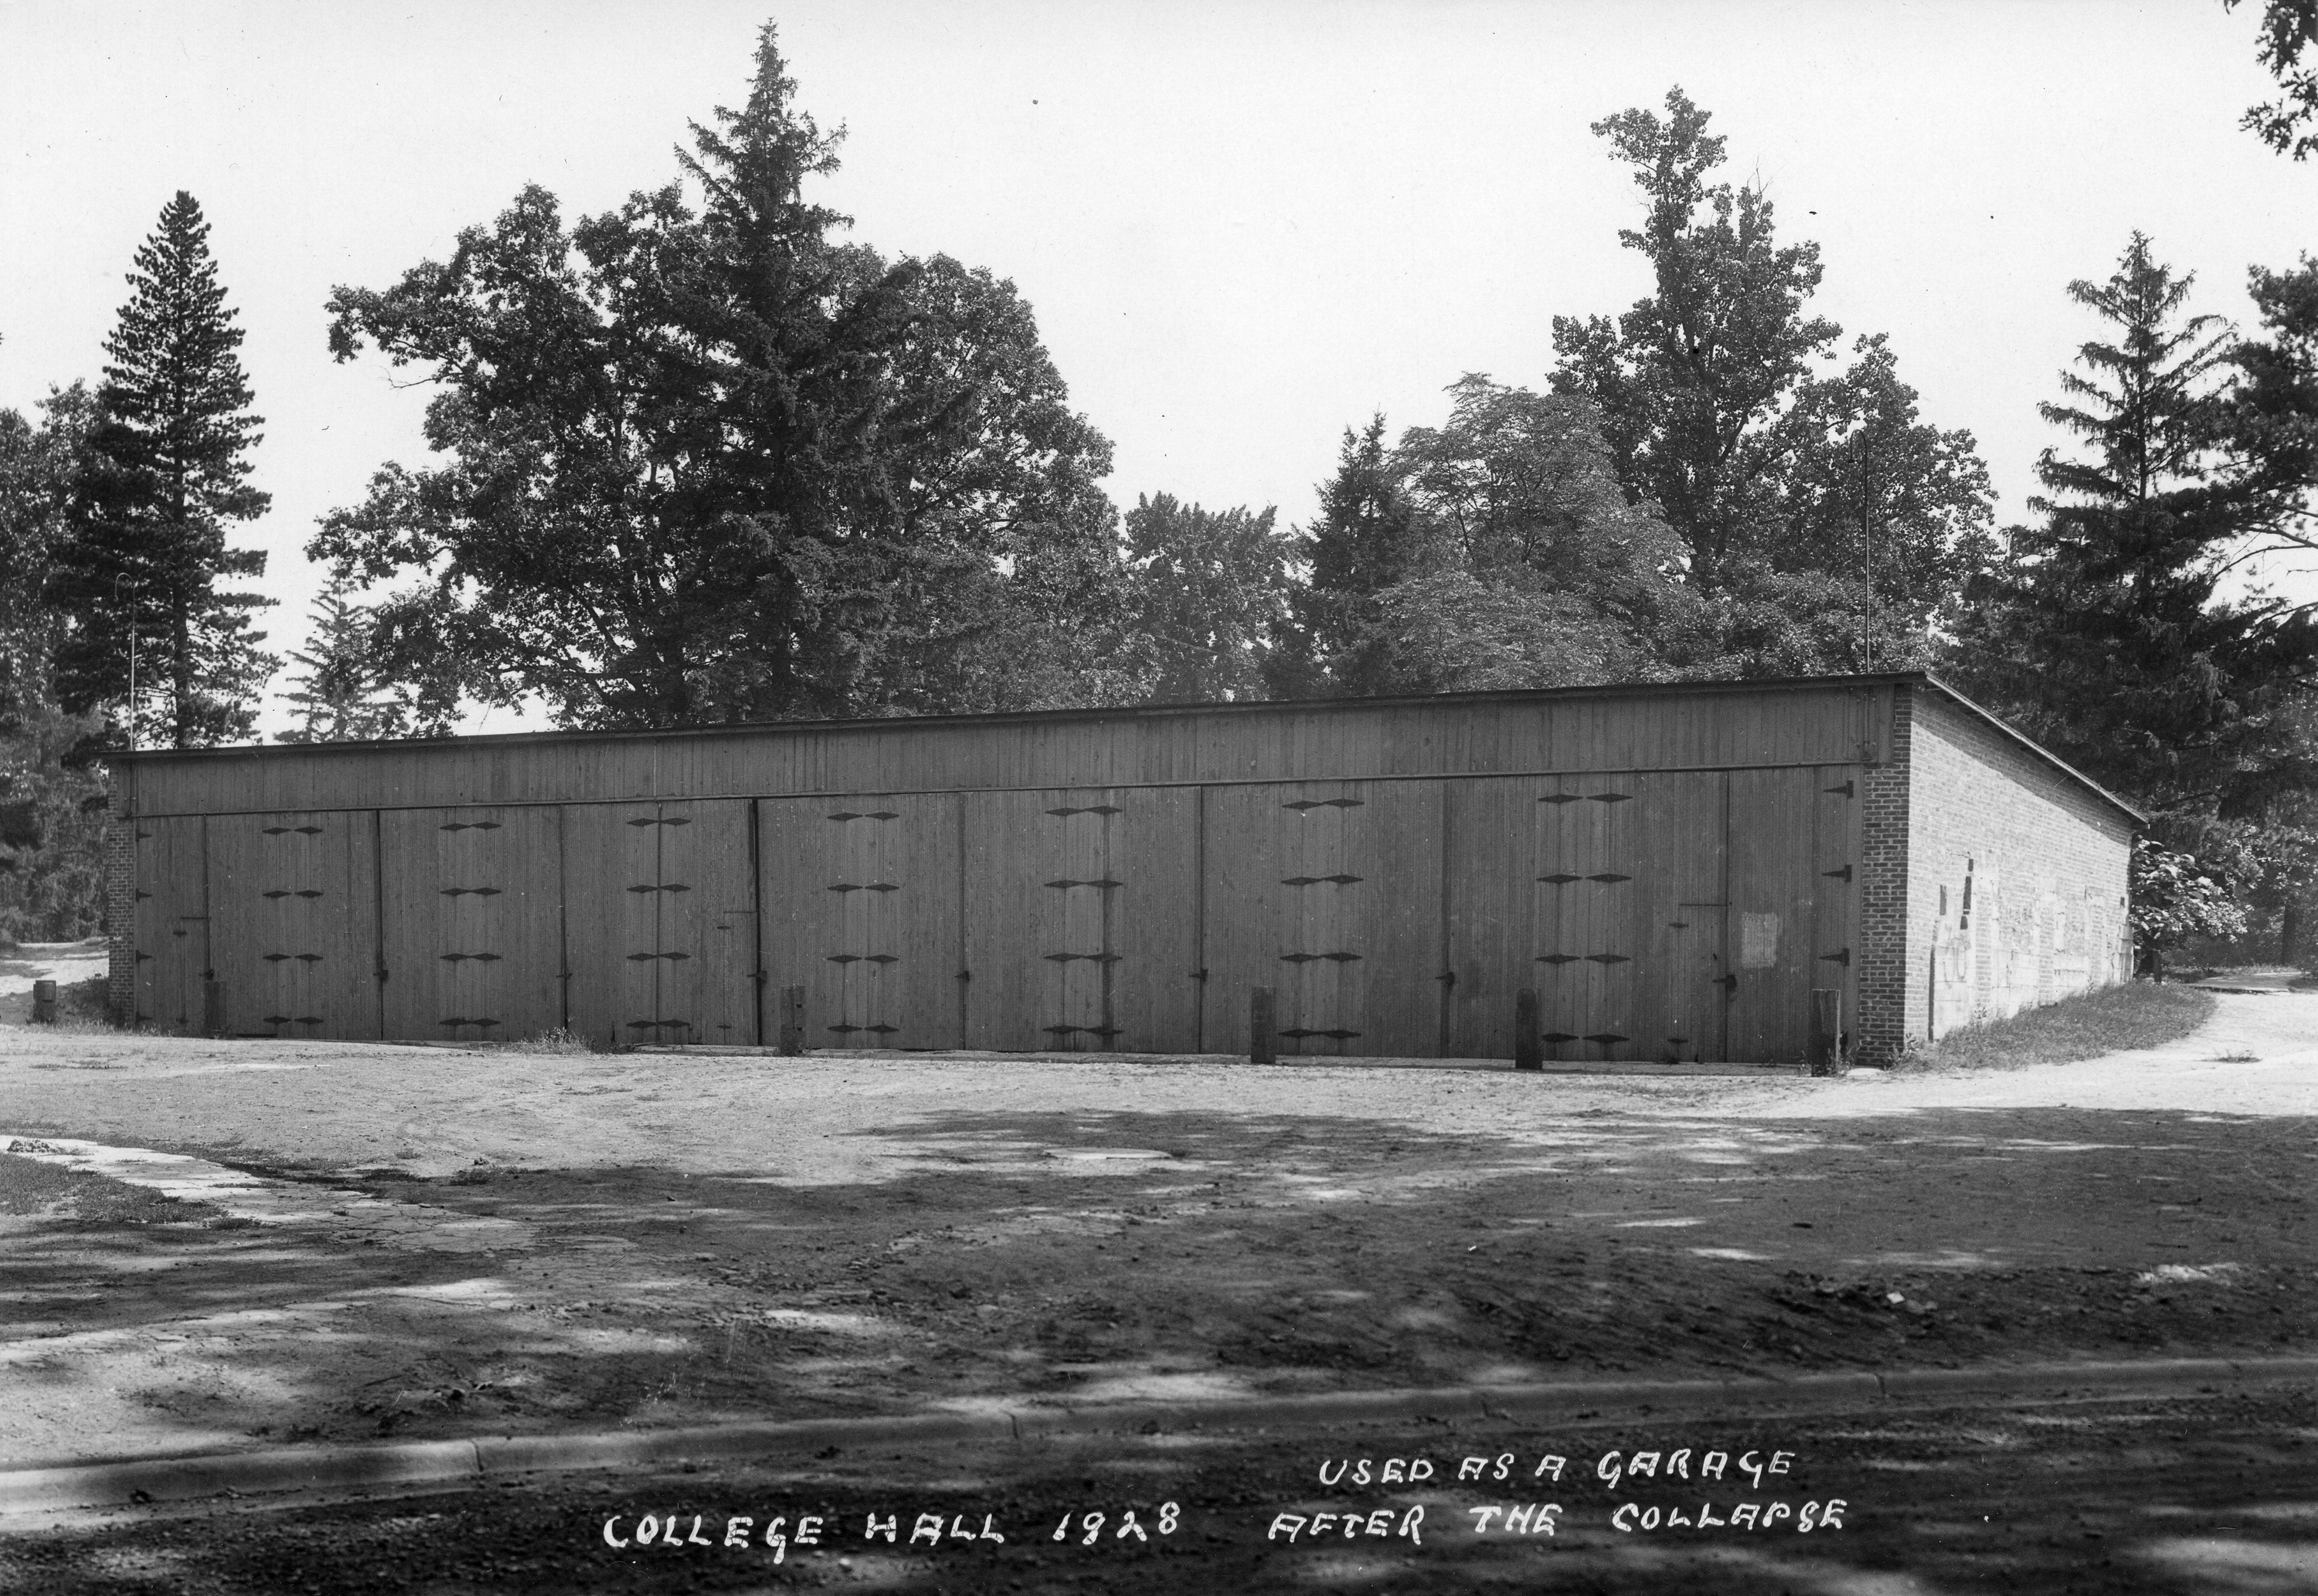 Artillery Shed, undated